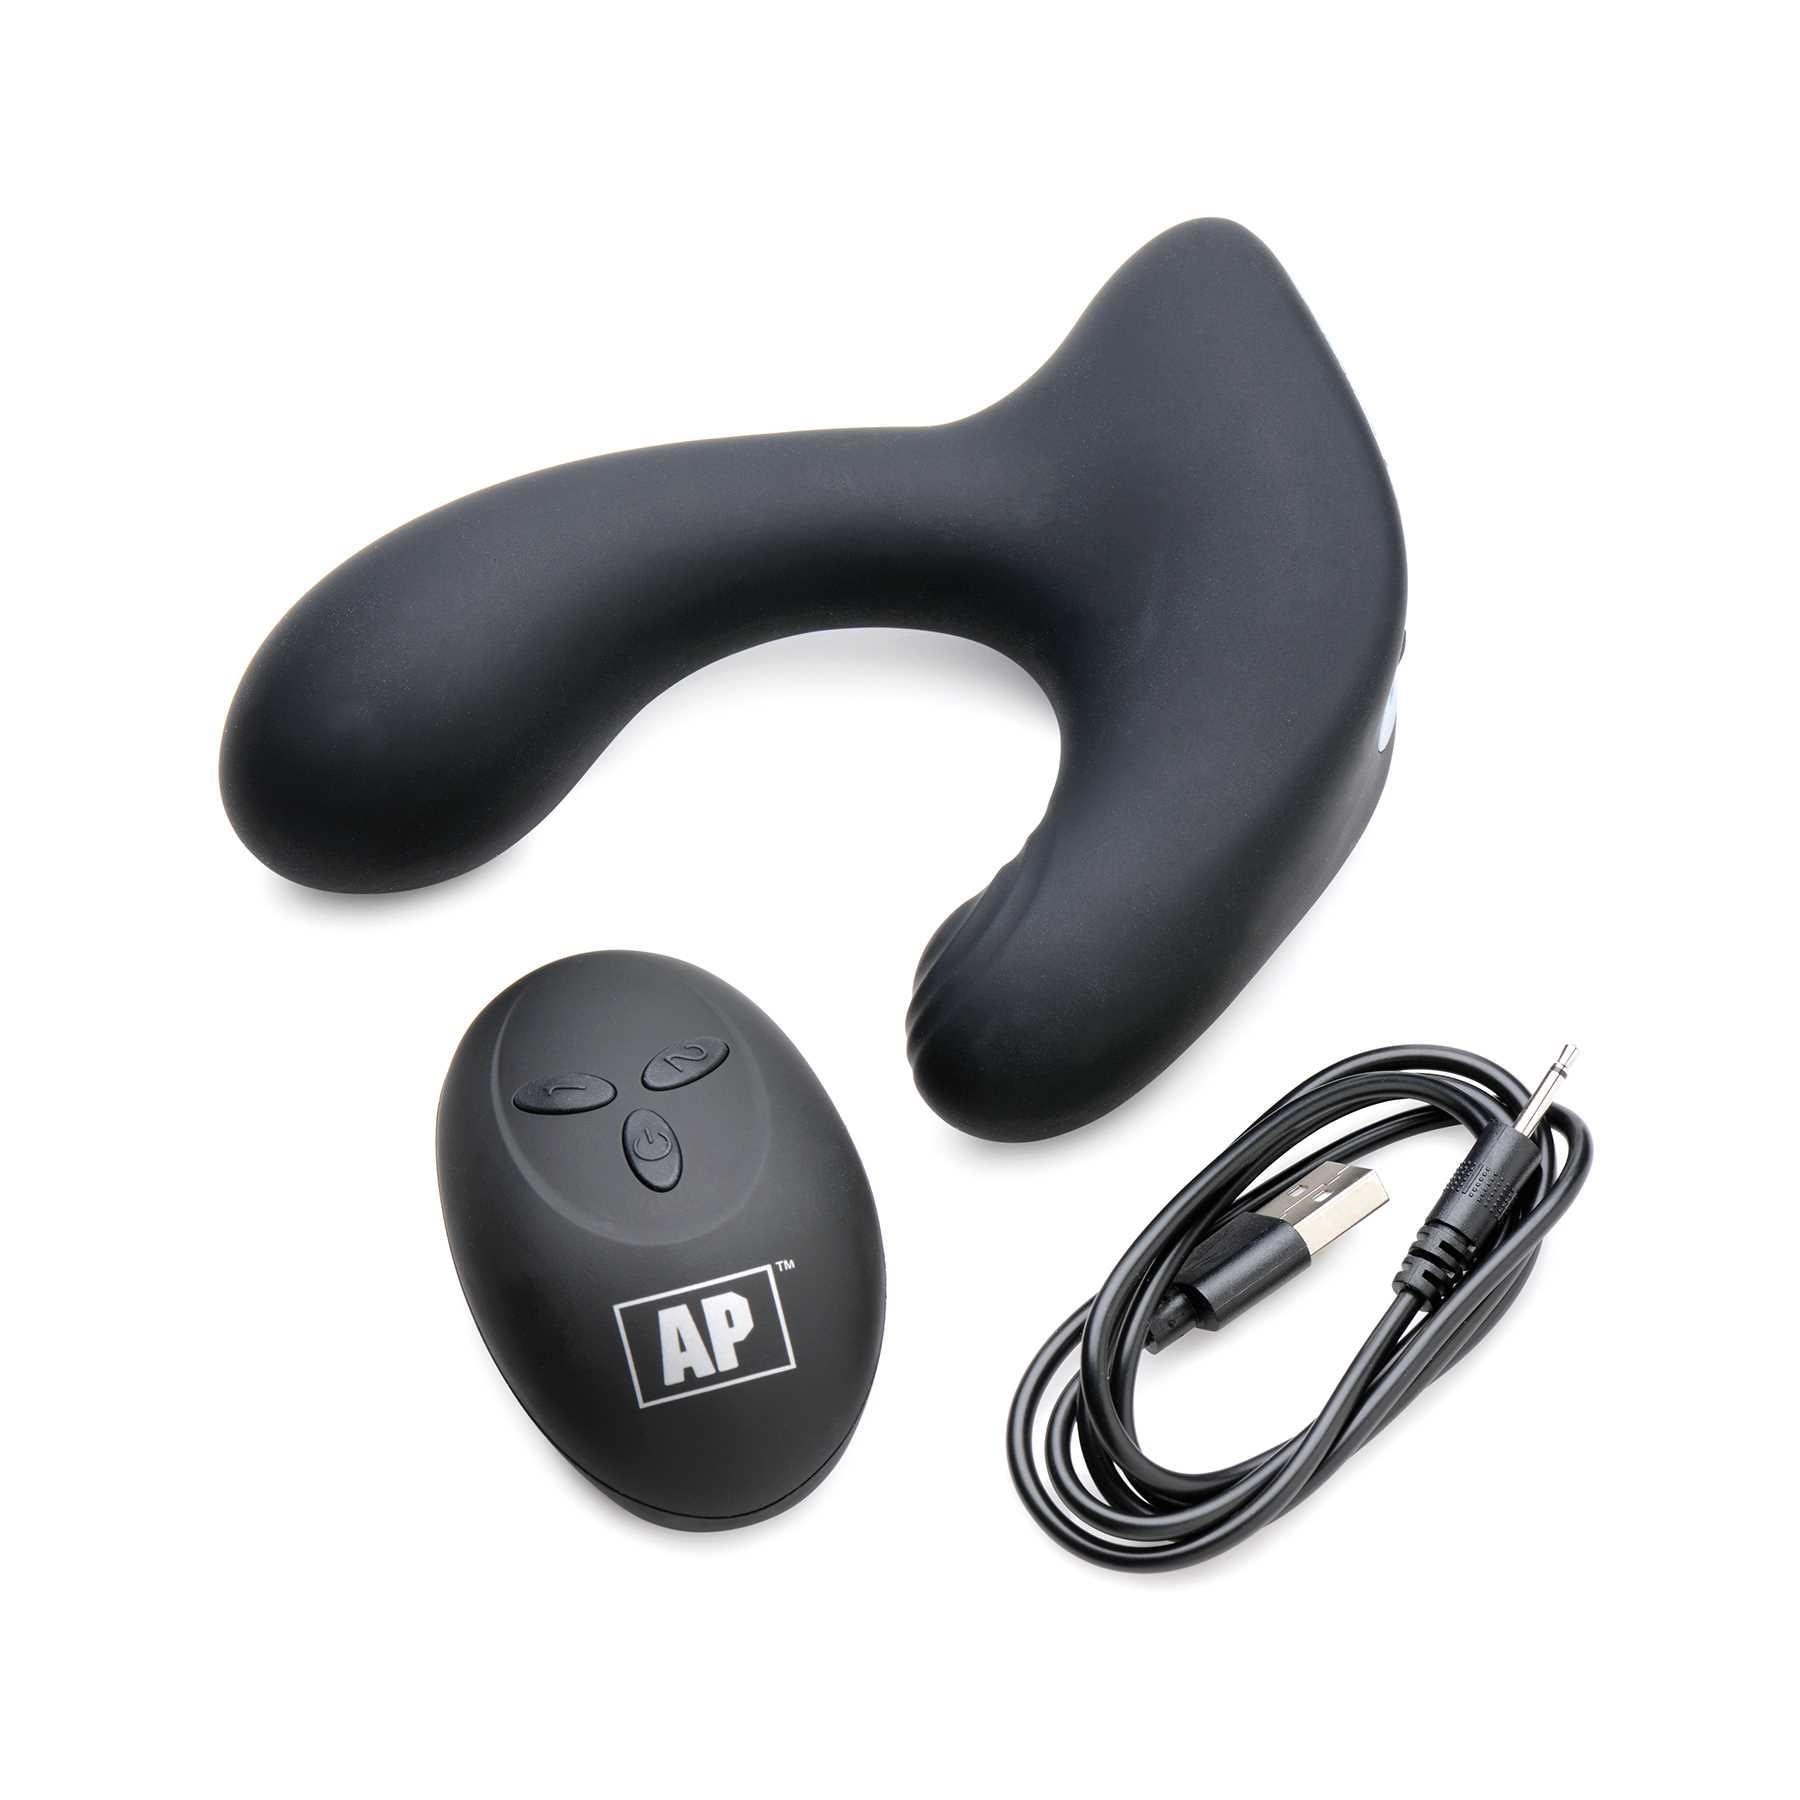 10X P-Pulse Taint Tapping silicone Prostate Stimulator with remote control and USB charger